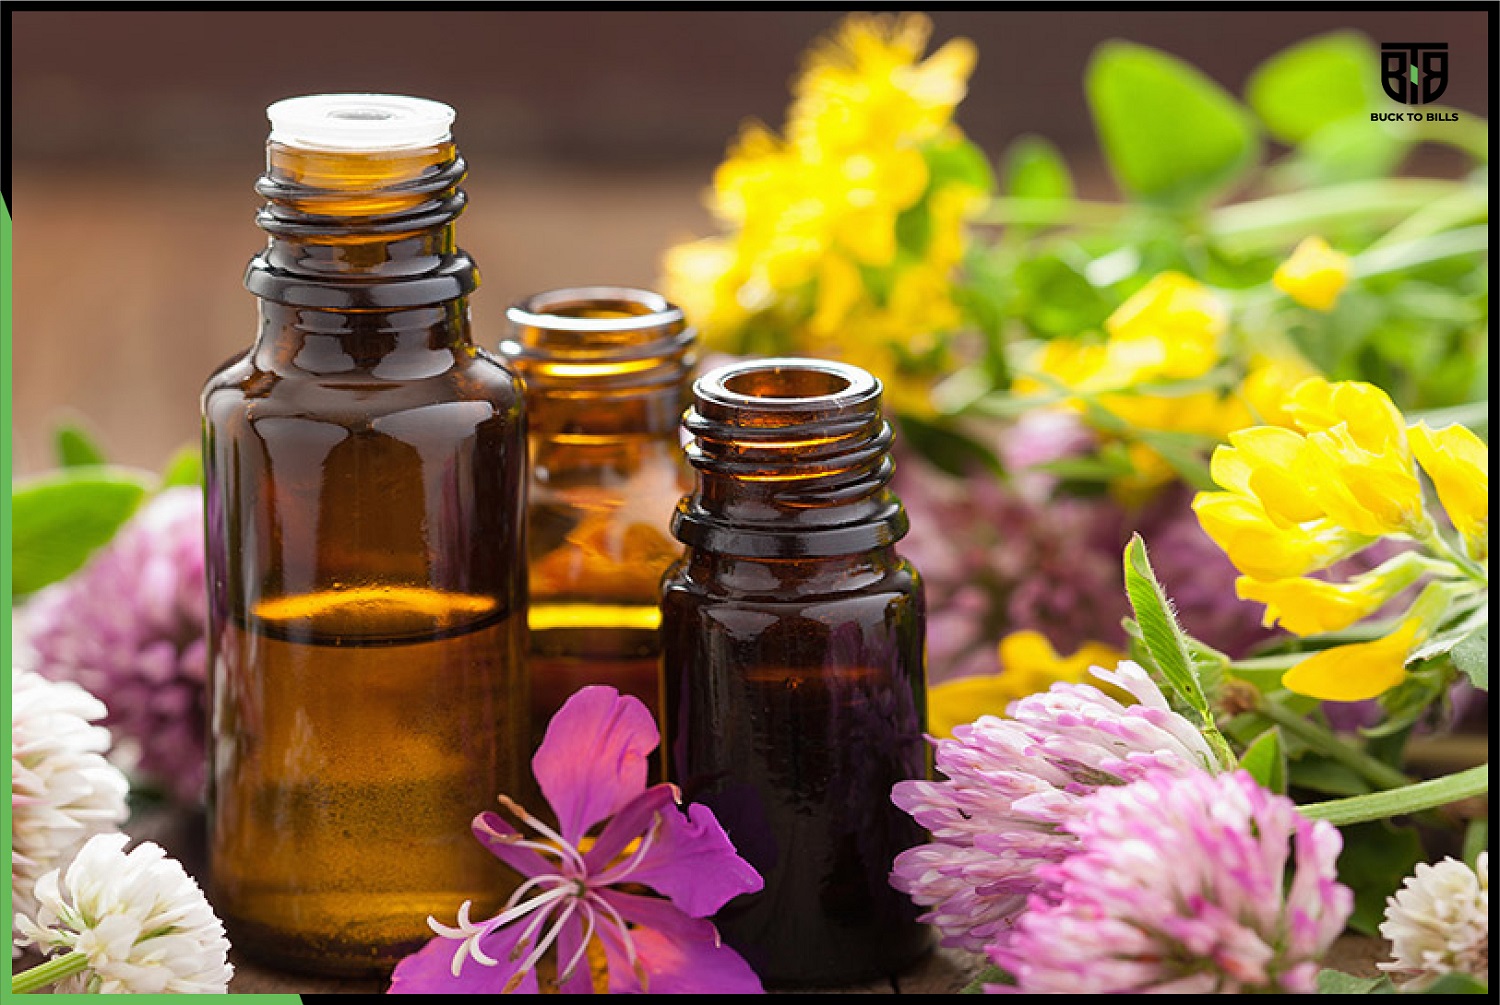 Does Aromatherapy really work?